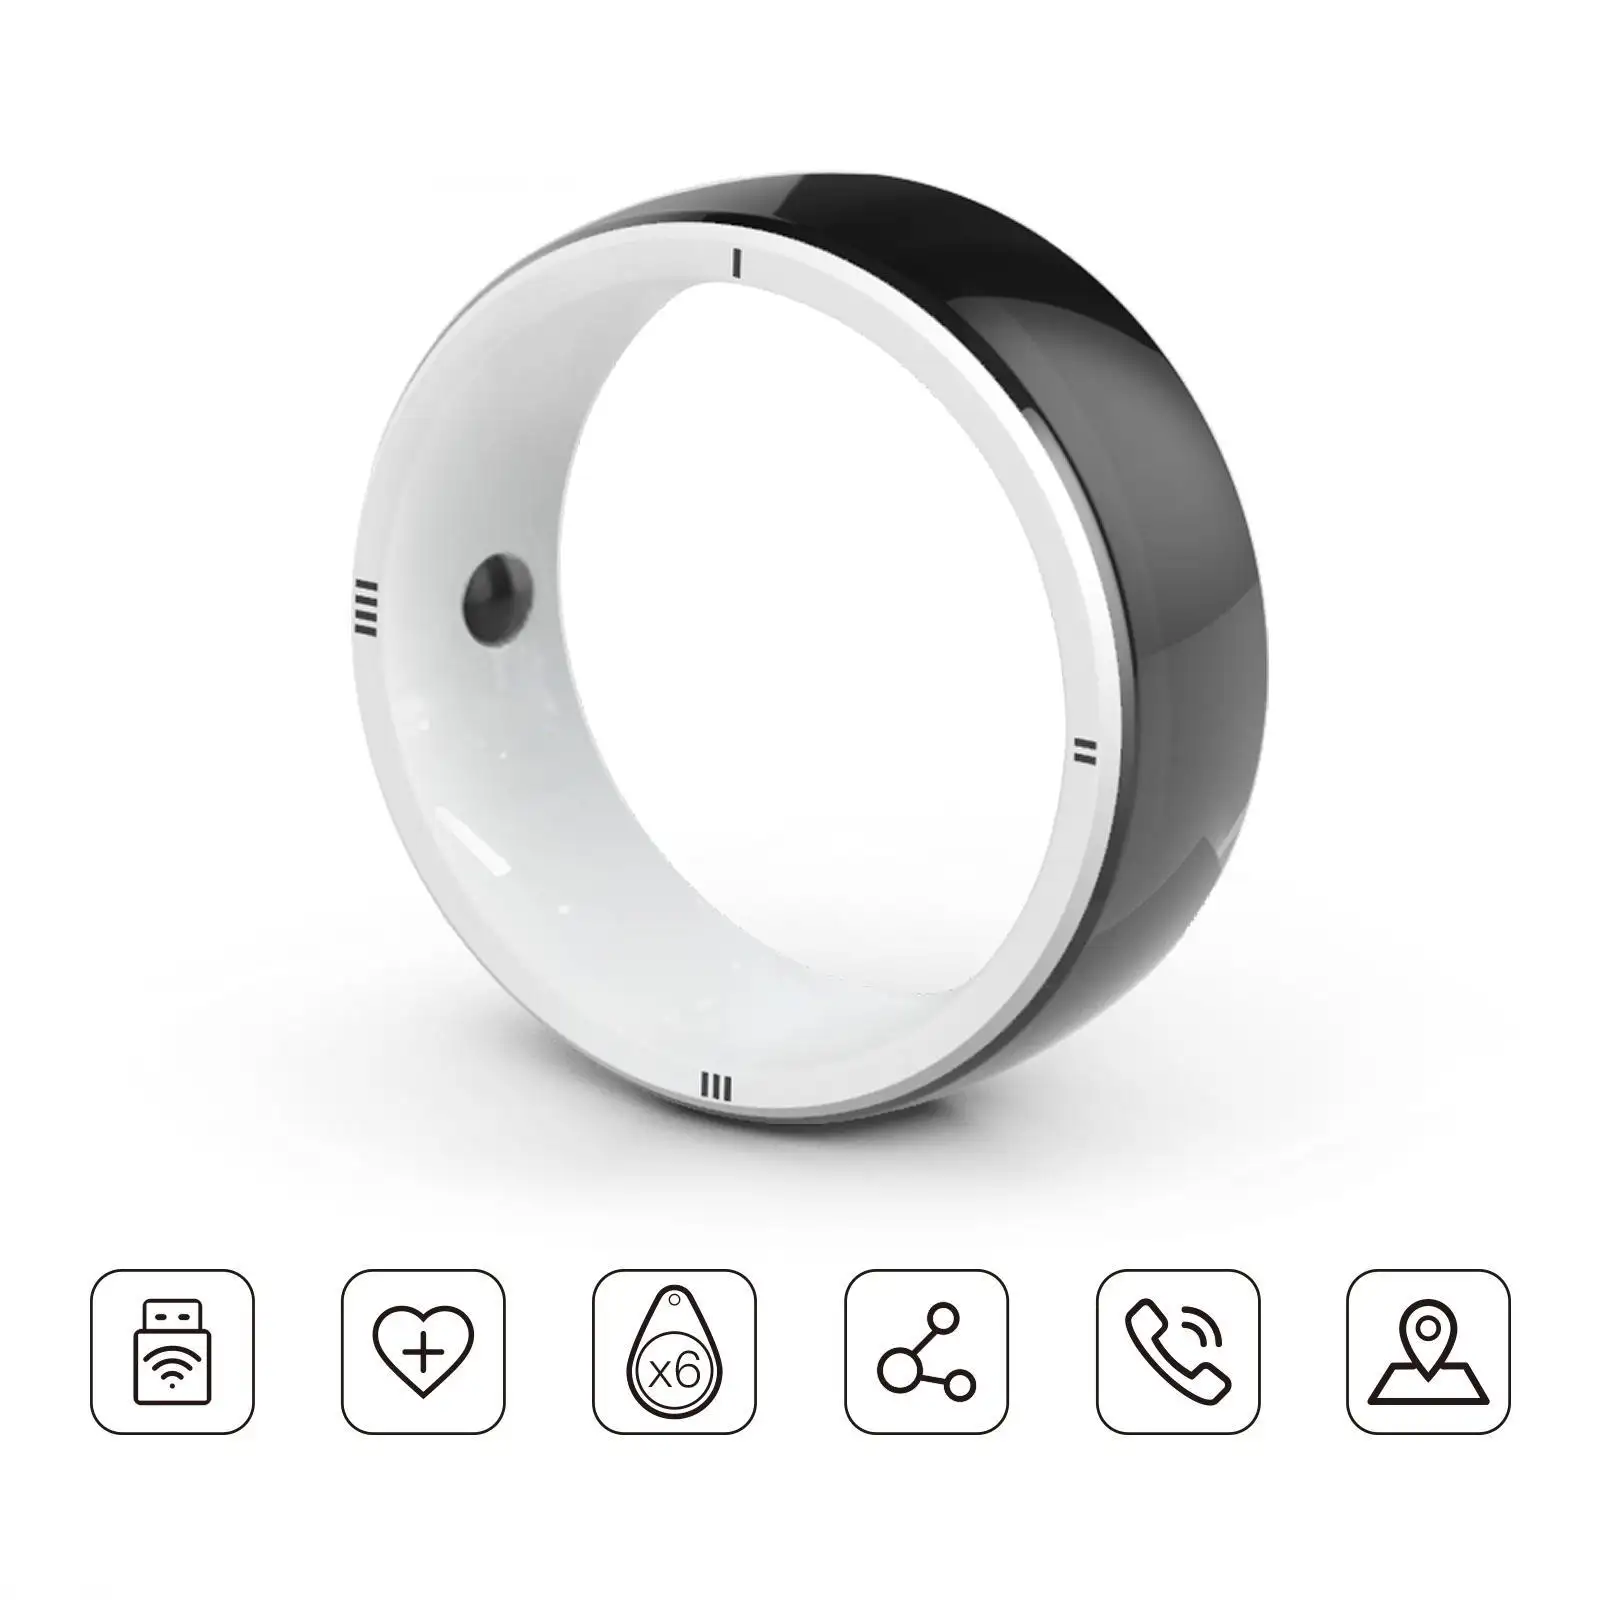 JAKCOM R5 Smart Ring New Smart Ring Match to best memory card for camera touch screen overlay tv white 3 contacts legs battery